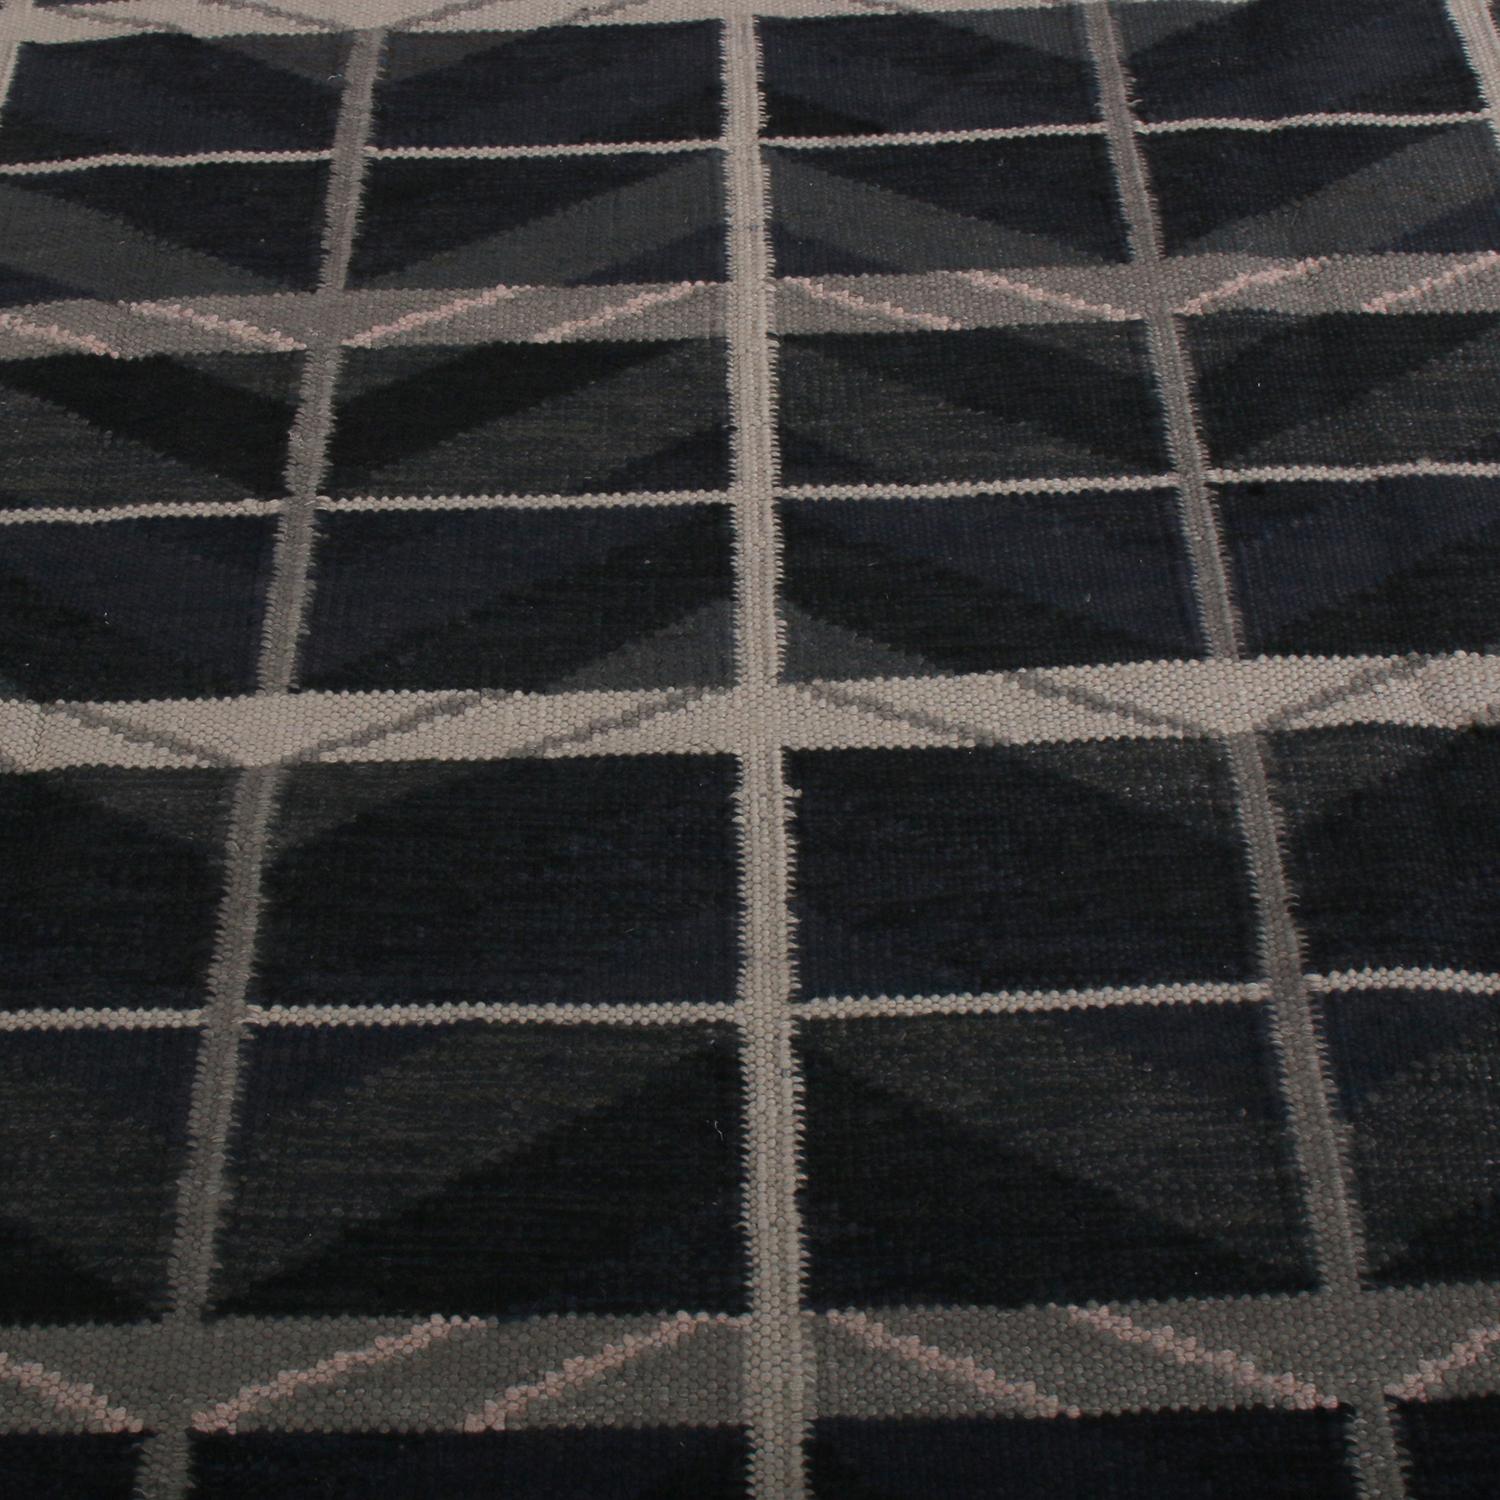 Handwoven in wool with a unique blend of natural undyed yarns, this modern Kilim rug hails from the latest flat-weave additions to Rug & Kilim’s Scandinavian Kilim collection, a celebration of Swedish modernism with new large-scale geometry and